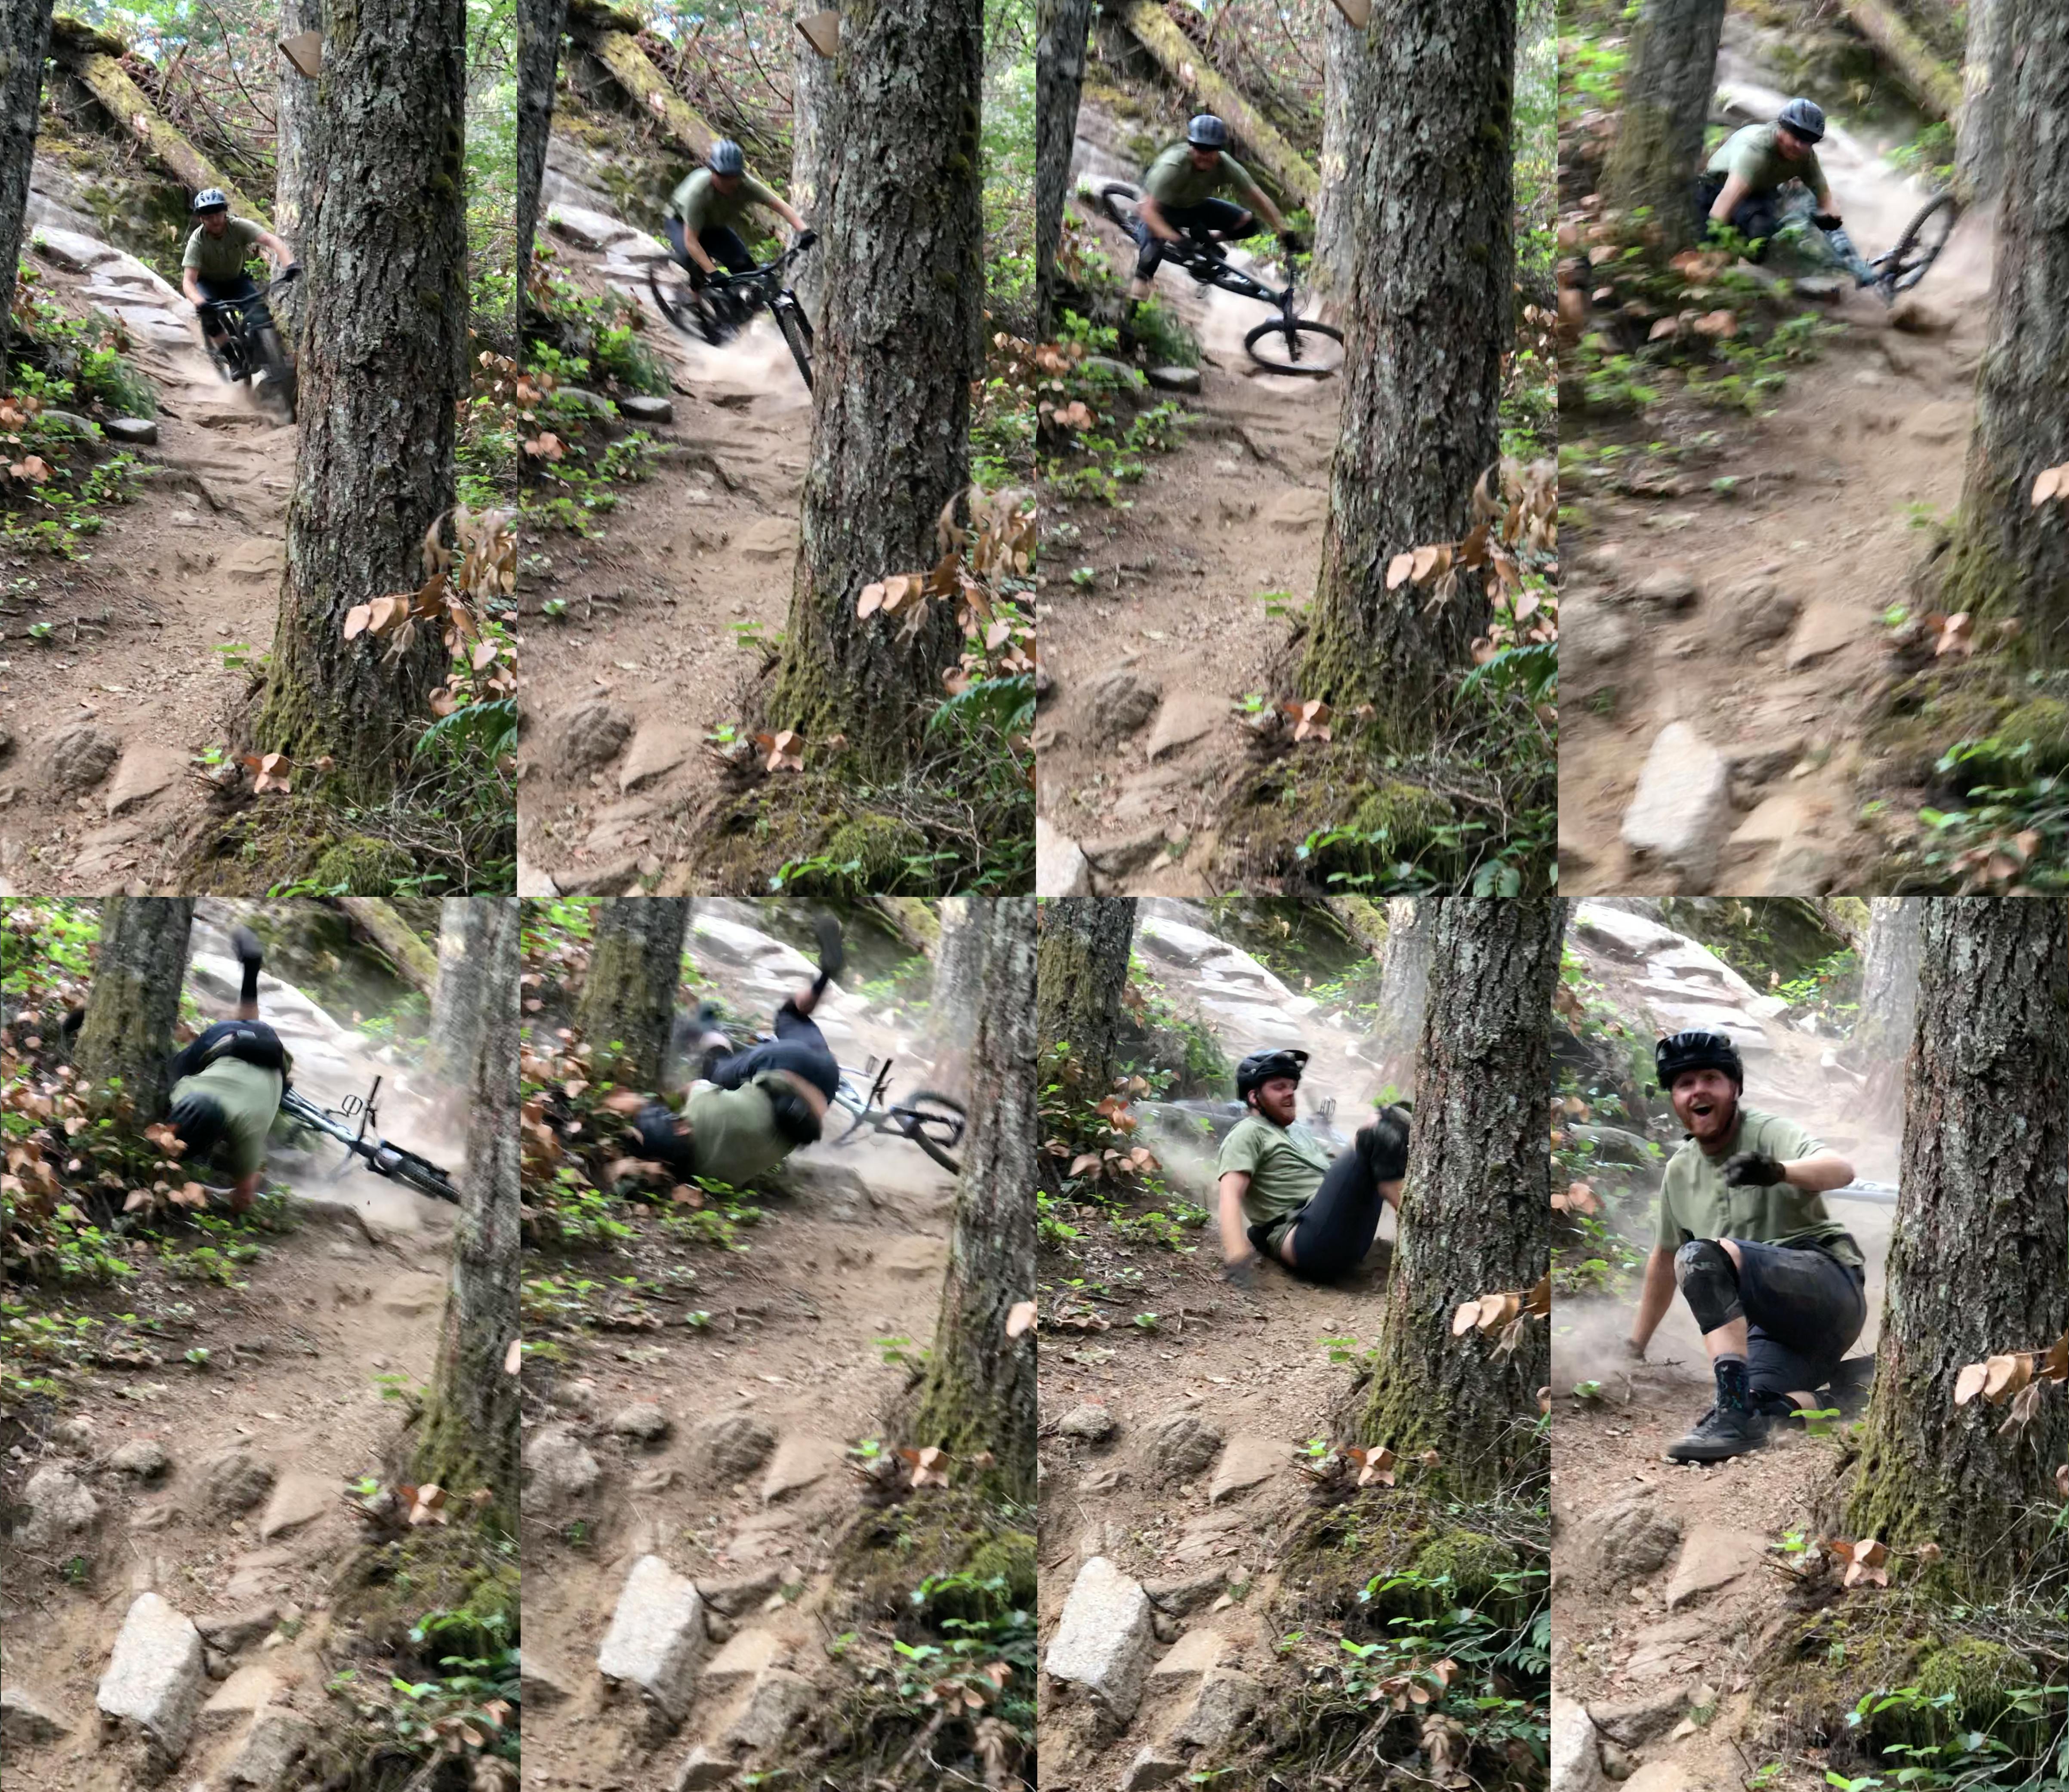 After executing all previous steps successfully, I was able to brush off the dust from this crash and continue riding! Eight images of different stages of a man falling from a bike.